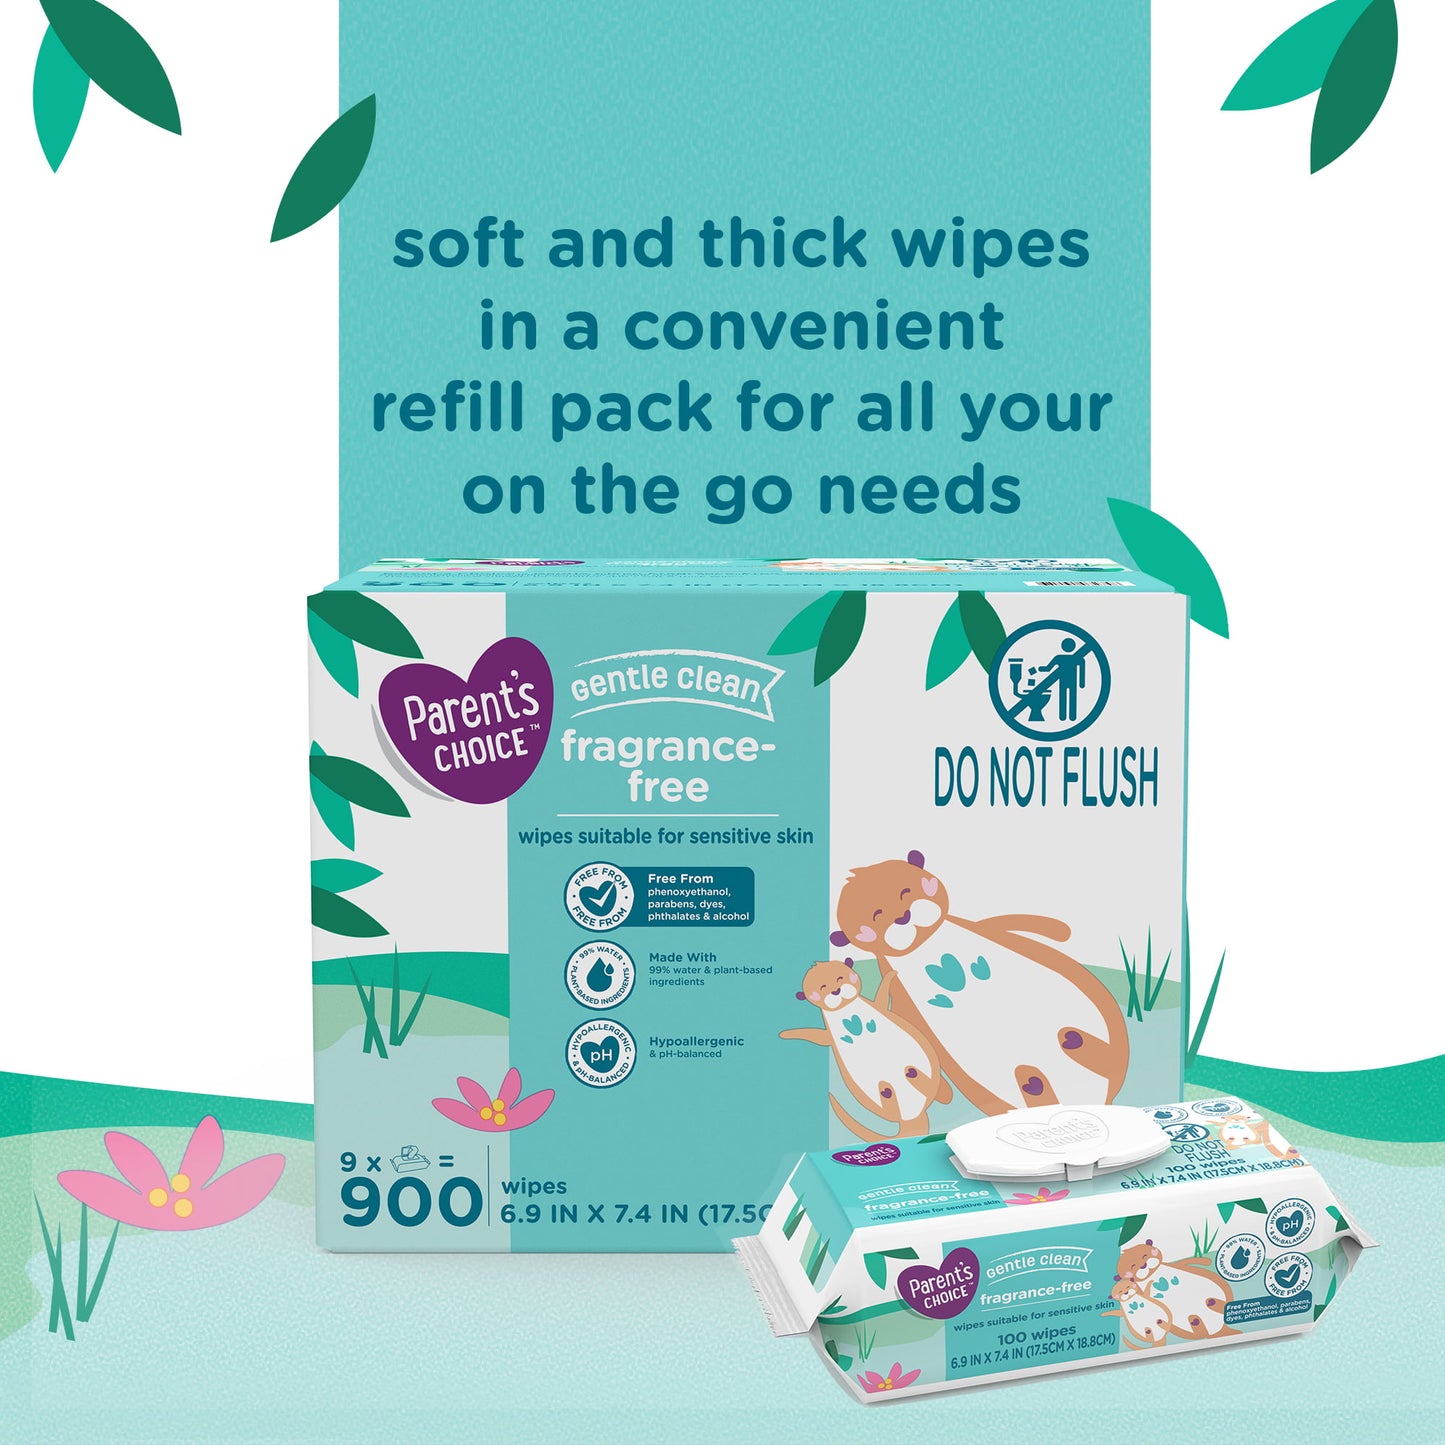 Parent's Choice Fragrance Free Baby Wipes (Choose Your Count)